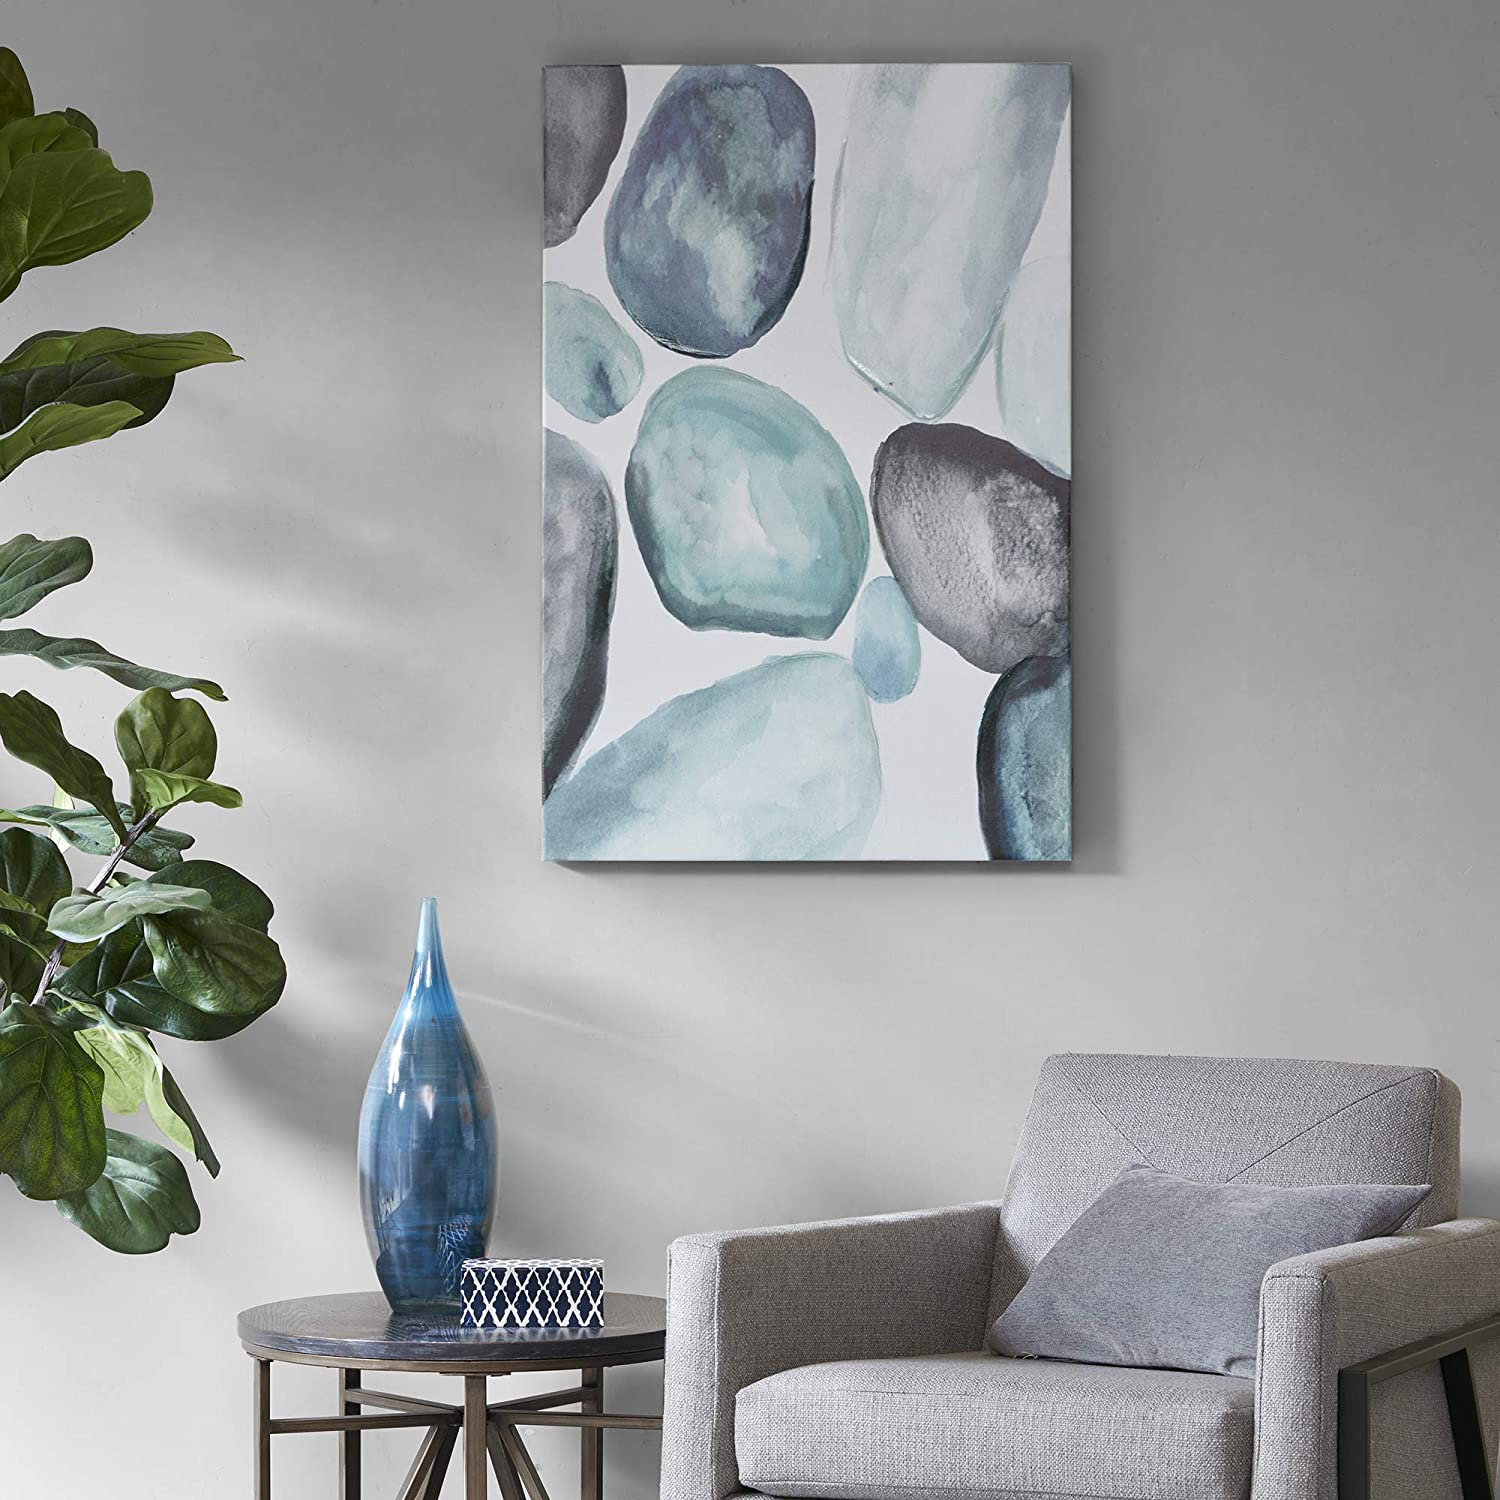 Madison Park Pebbles Wall Art-Geo Rocks Shapes Hand Embellished Artwork Print Modern Abstract Canvas Painting Deco Box Living Room D√©cor, Blue